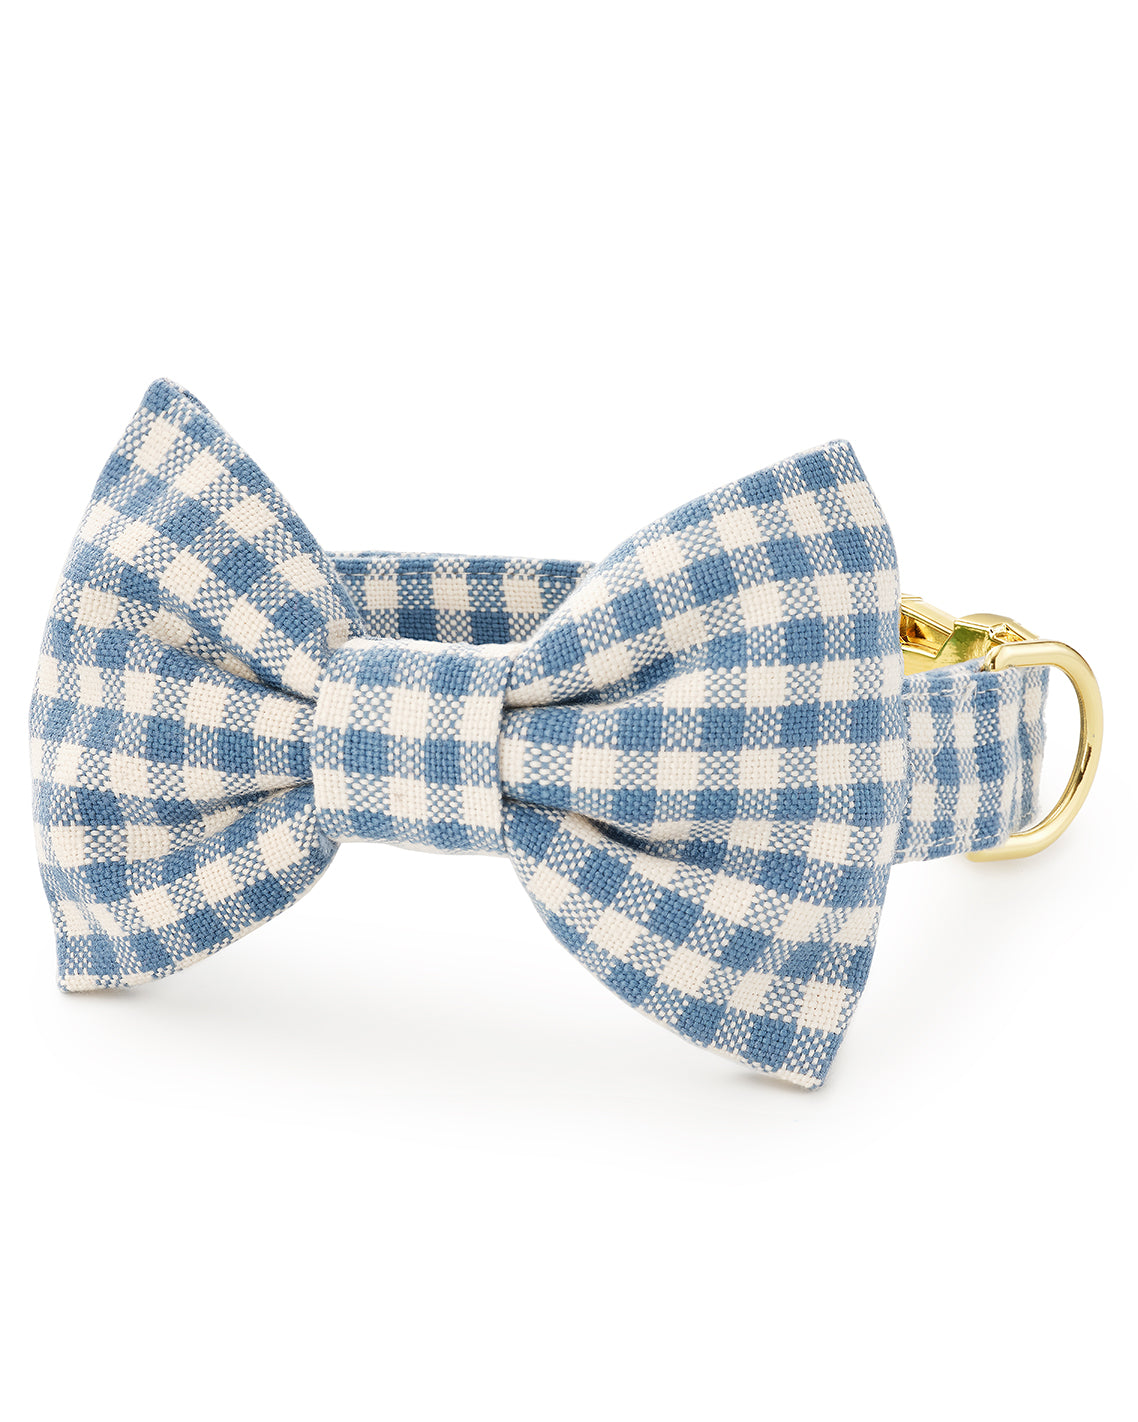 DJ x TFD Bow Tie in Blue Gingham